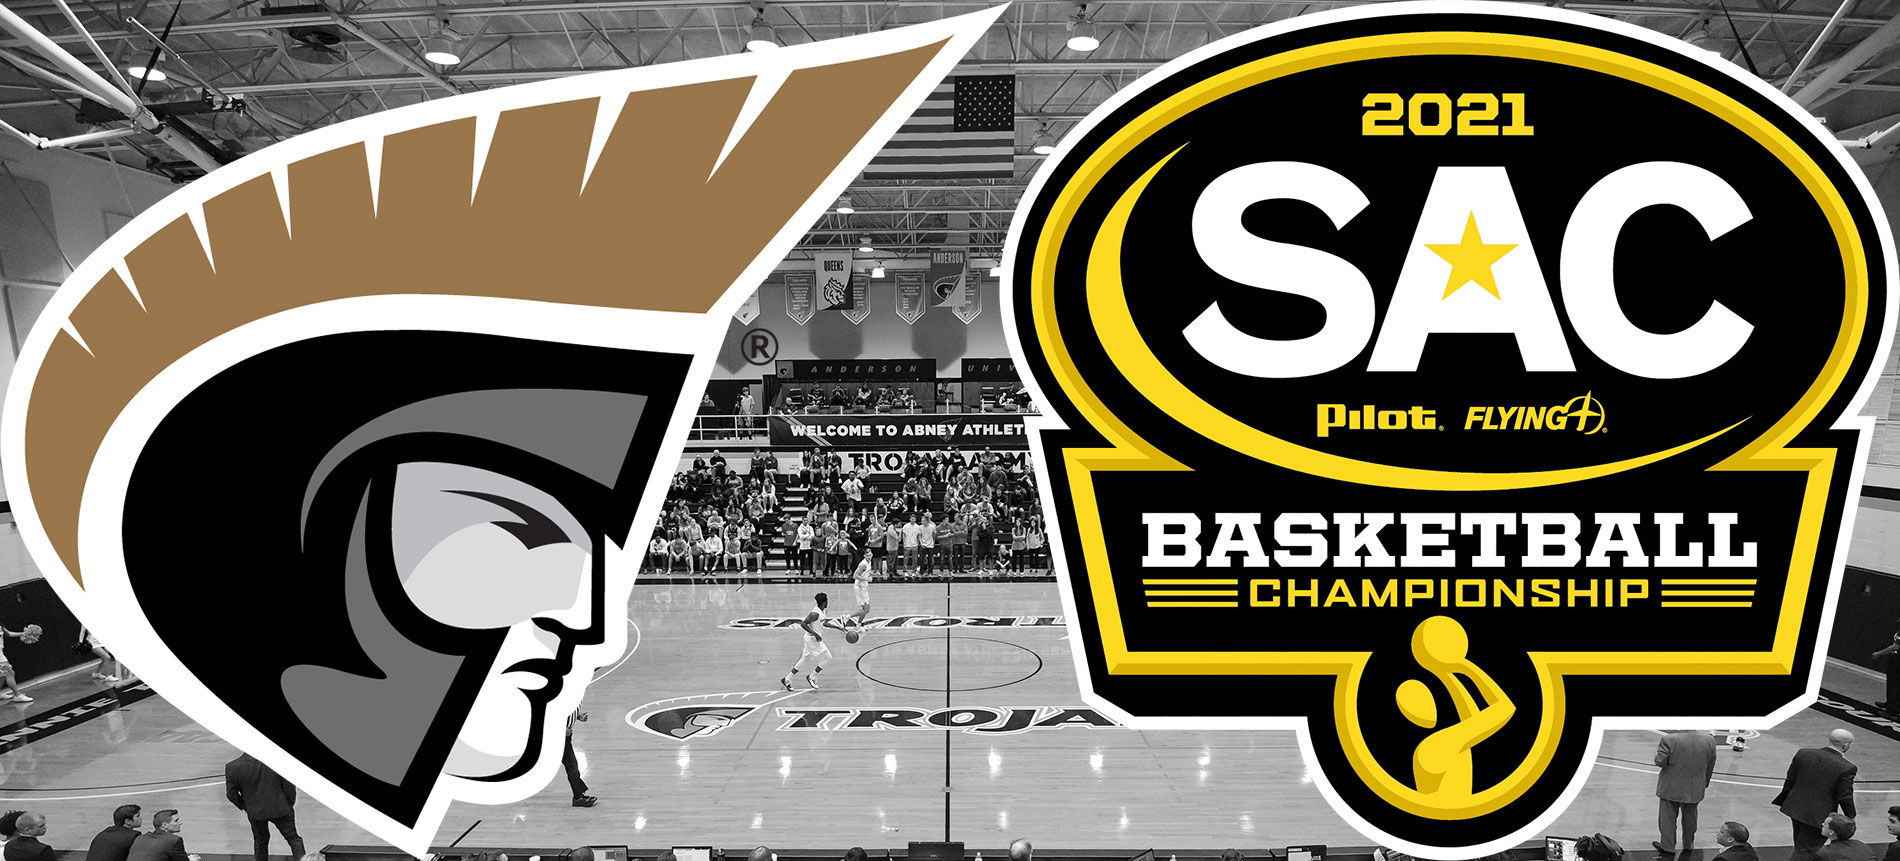 SAC ANNOUNCES BASKETBALL GAME CANCELATIONS AND MODIFICATIONS TO PILOT FLYING J MEN’S BASKETBALL CHAMPIONSHIP